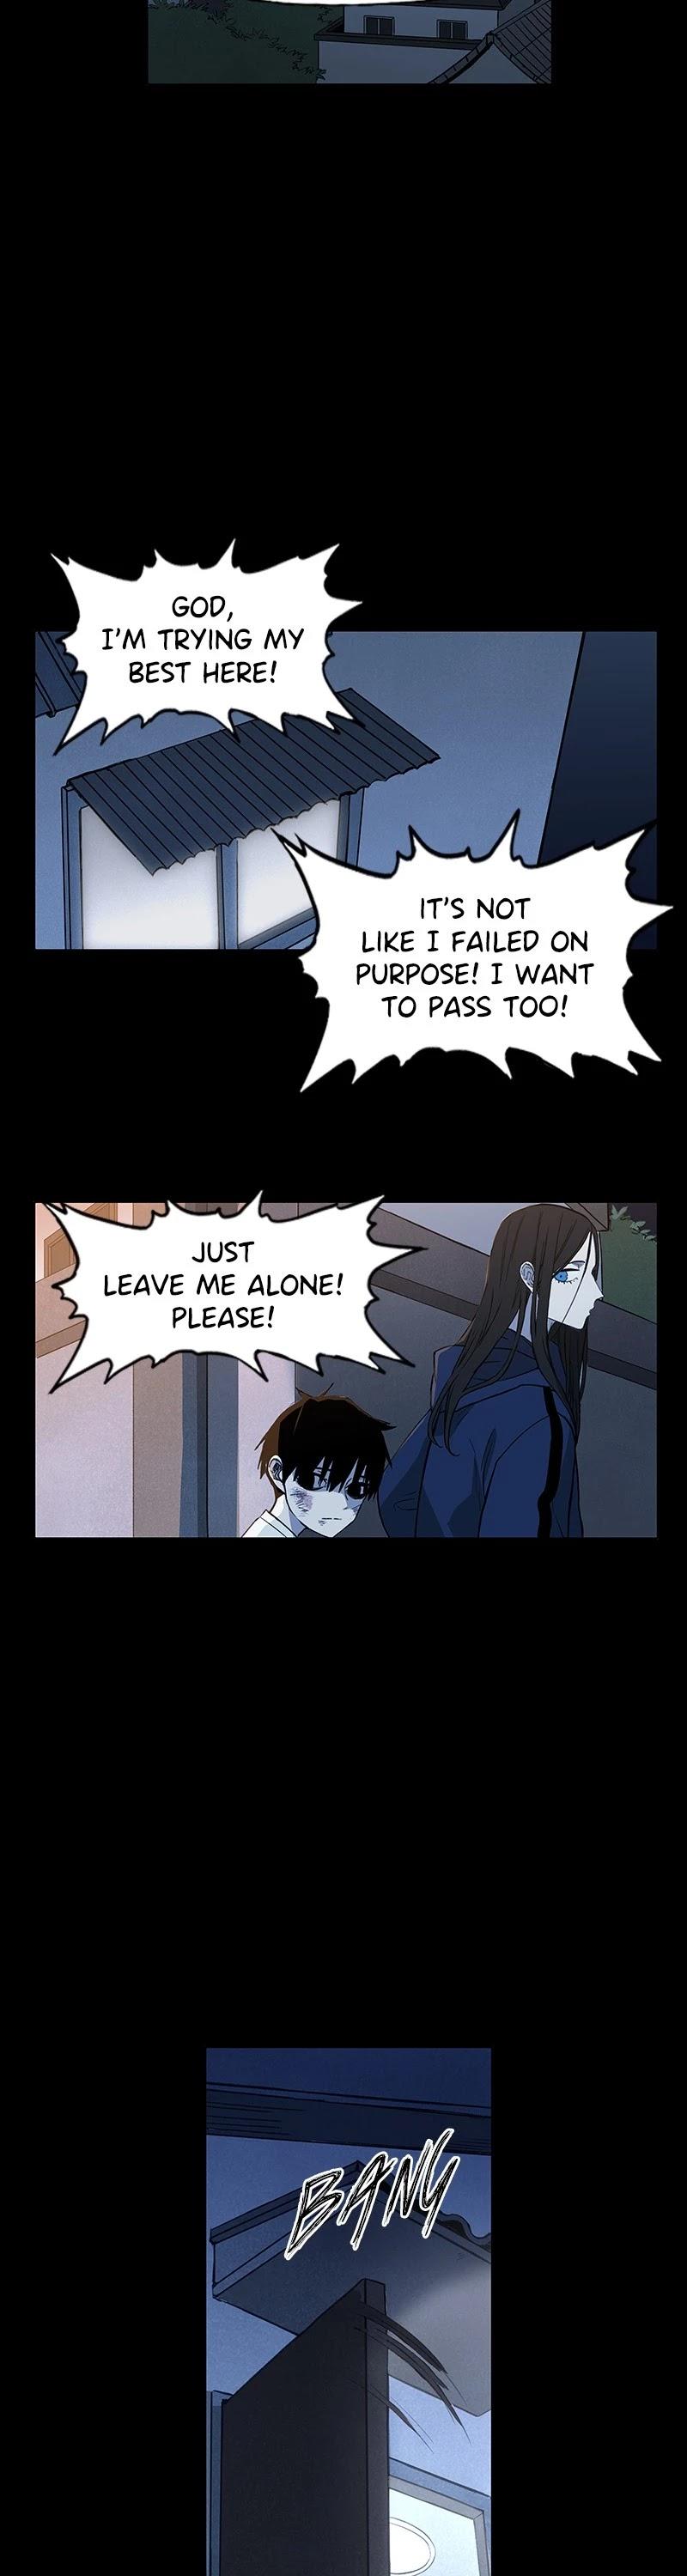 The Boxer Chapter 106: Ep. 96 - The Boy With No Name (3) page 23 - 